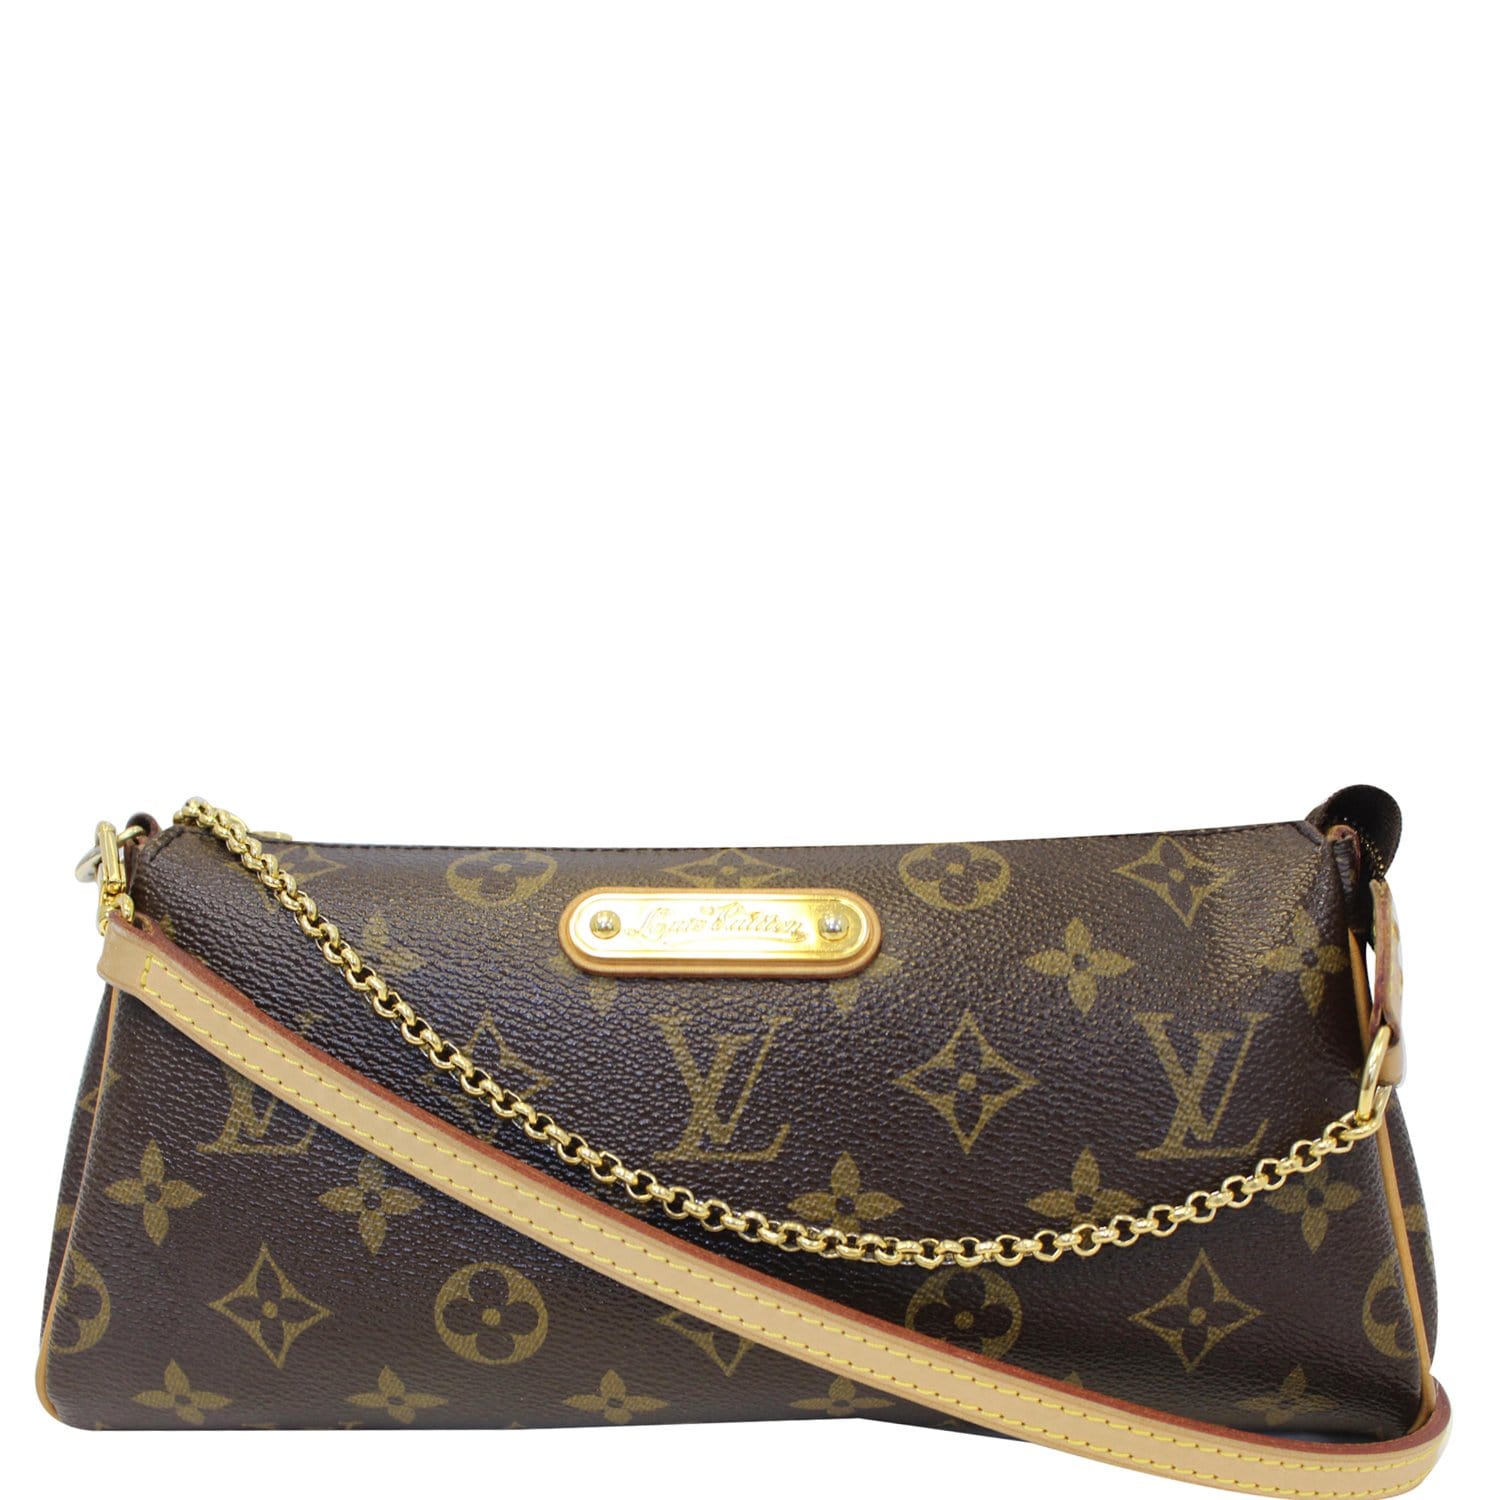 Louis Vuitton small pochette replacement piece for bucket bag 23. 